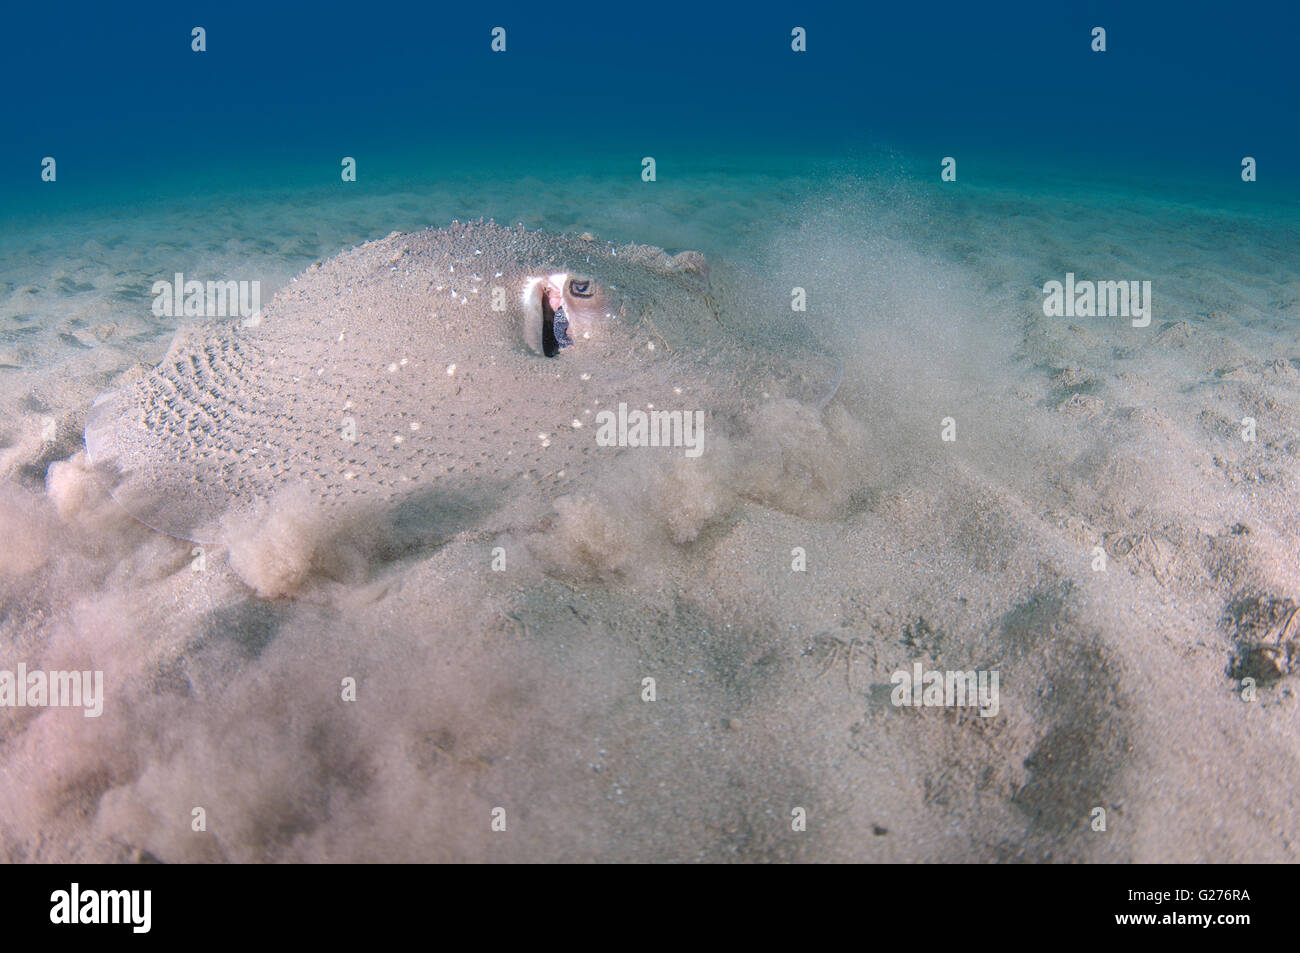 African ray or Porcupine ray (Urogymnus asperrimus) on the sandy bottom Stock Photo